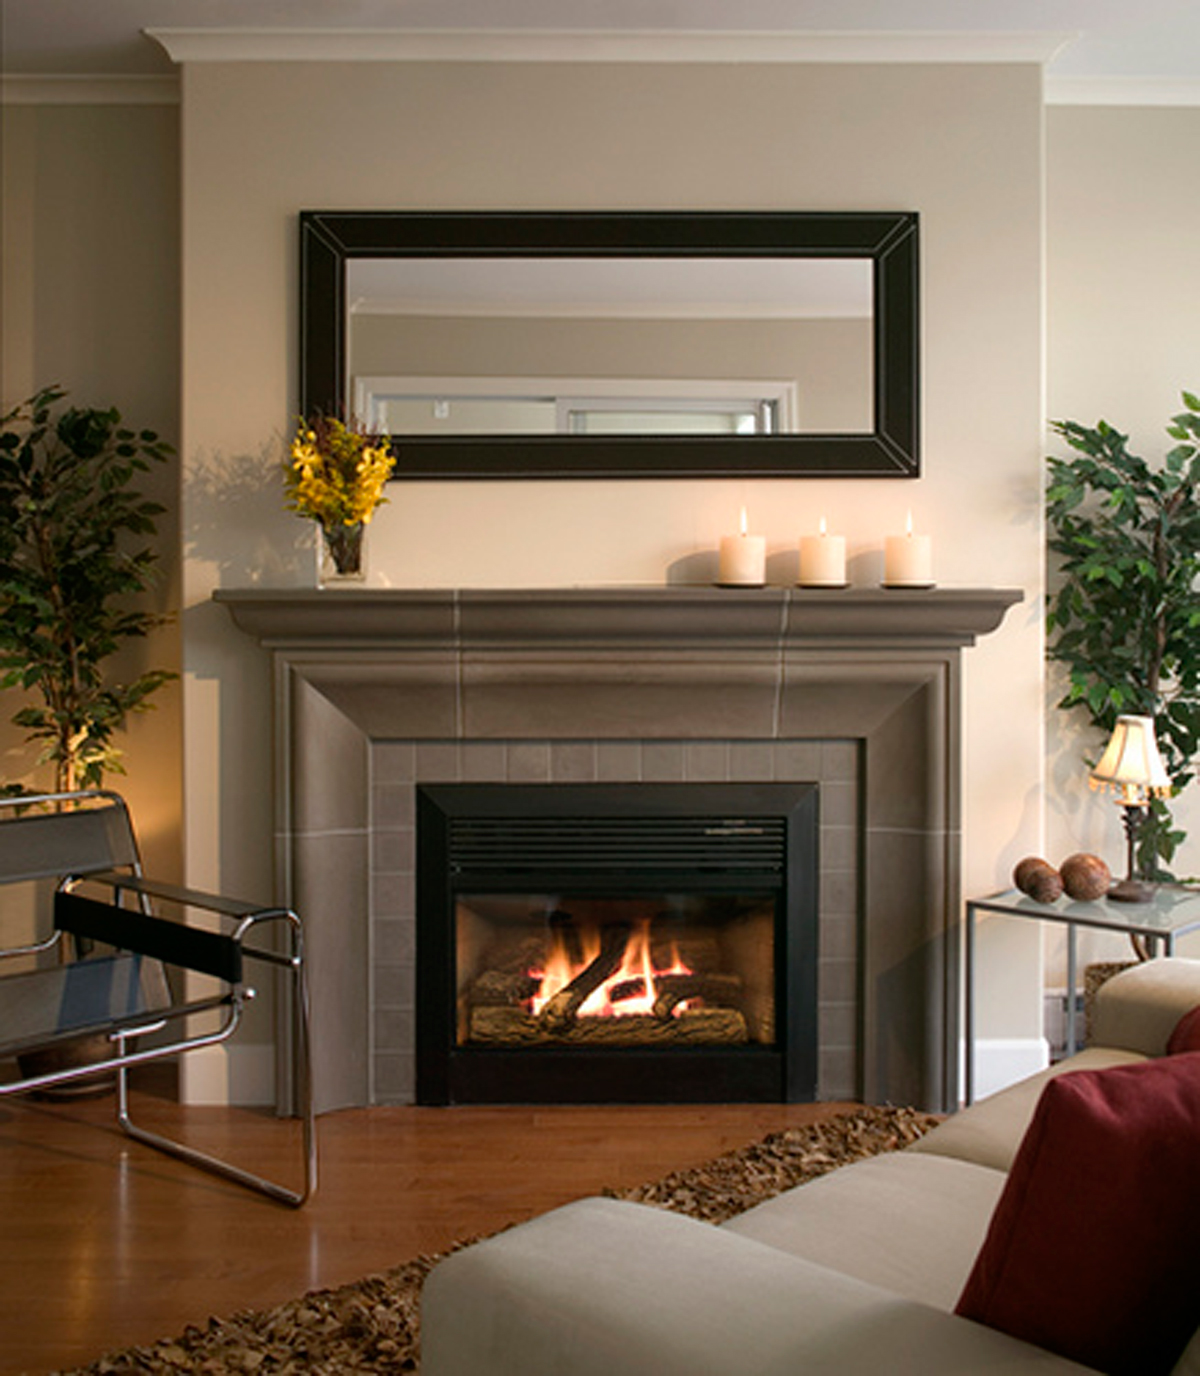 Increase Heat Efficiency with Fireplace Inserts